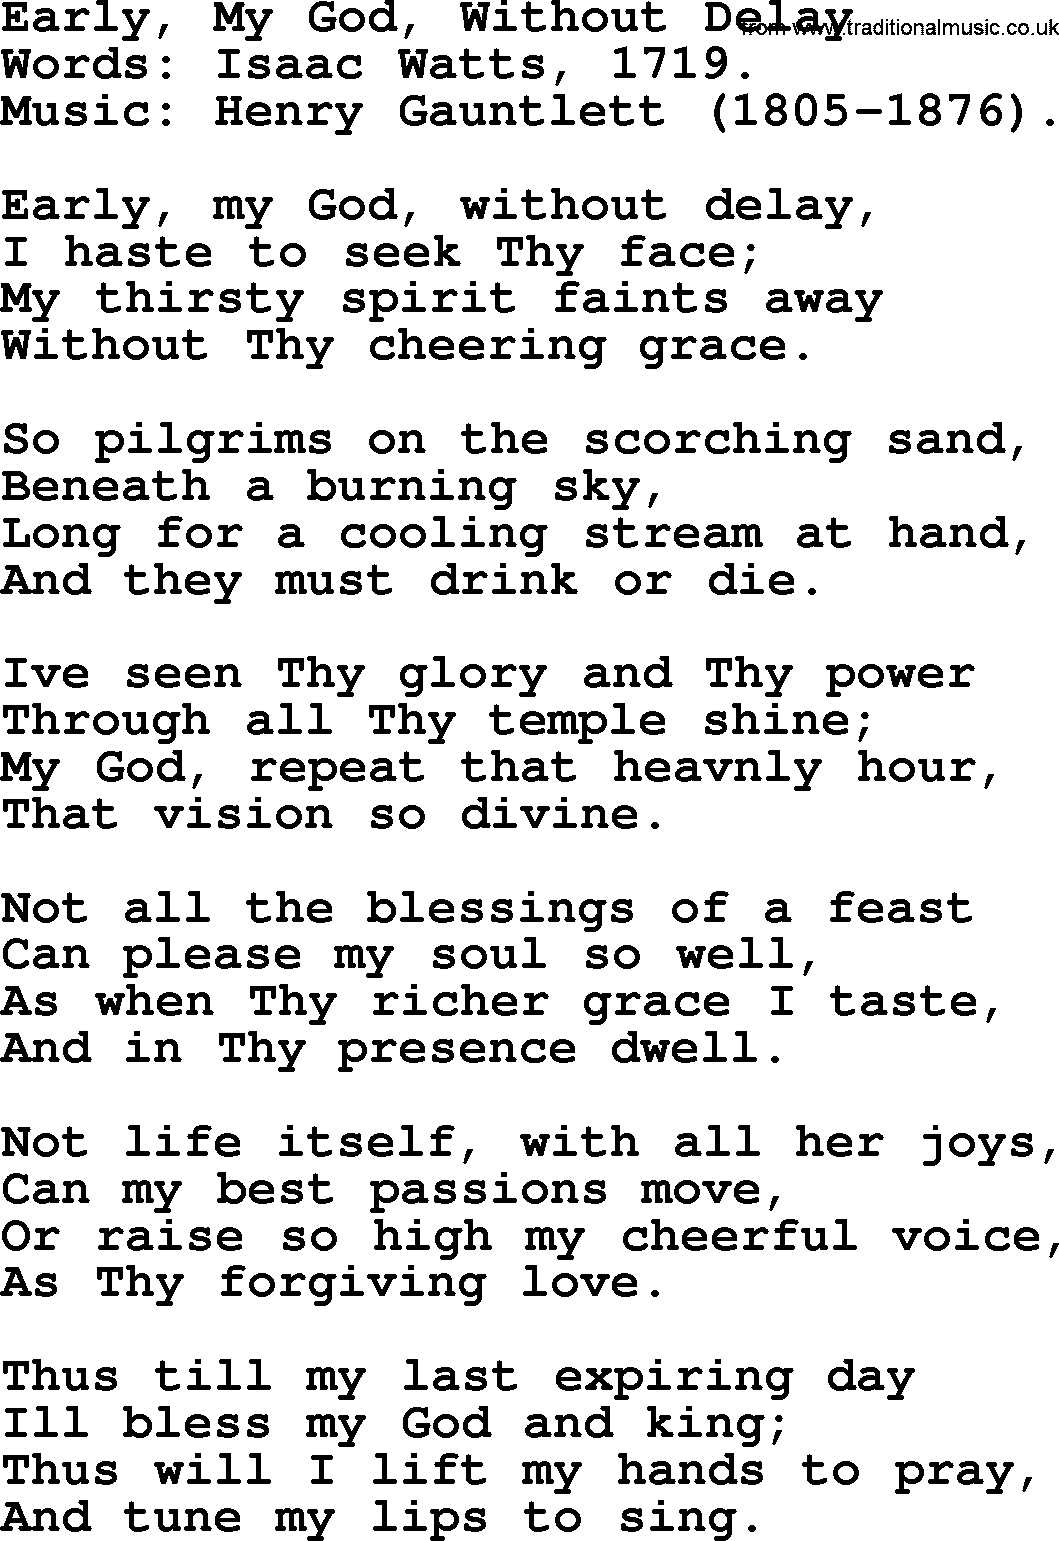 Isaac Watts Christian hymn: Early, My God, Without Delay- lyricss